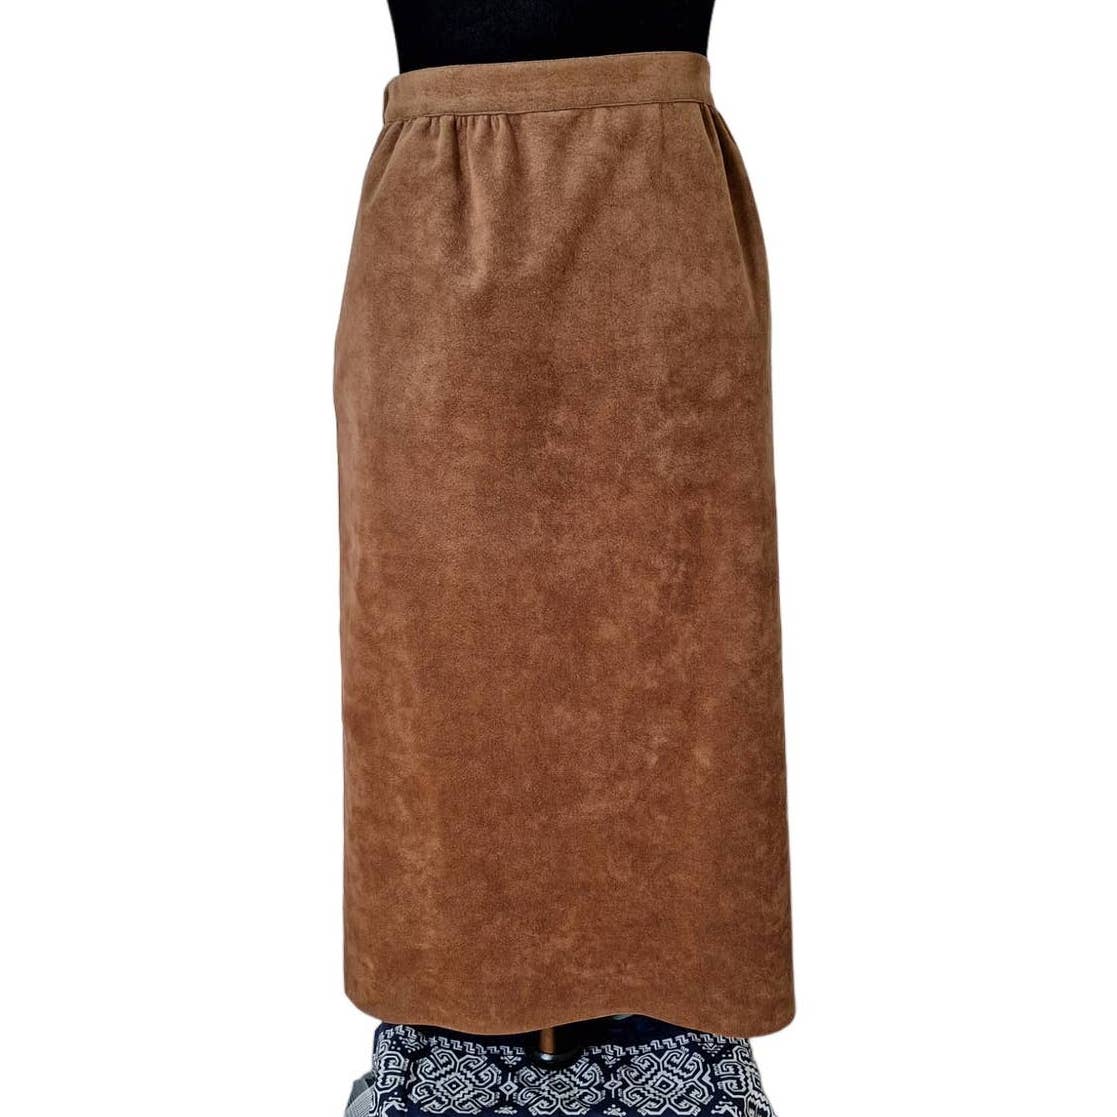 70s Brown Faux Suede Midi Skirt Size Medium Waist 27" to 31" - themallvintage The Mall Vintage